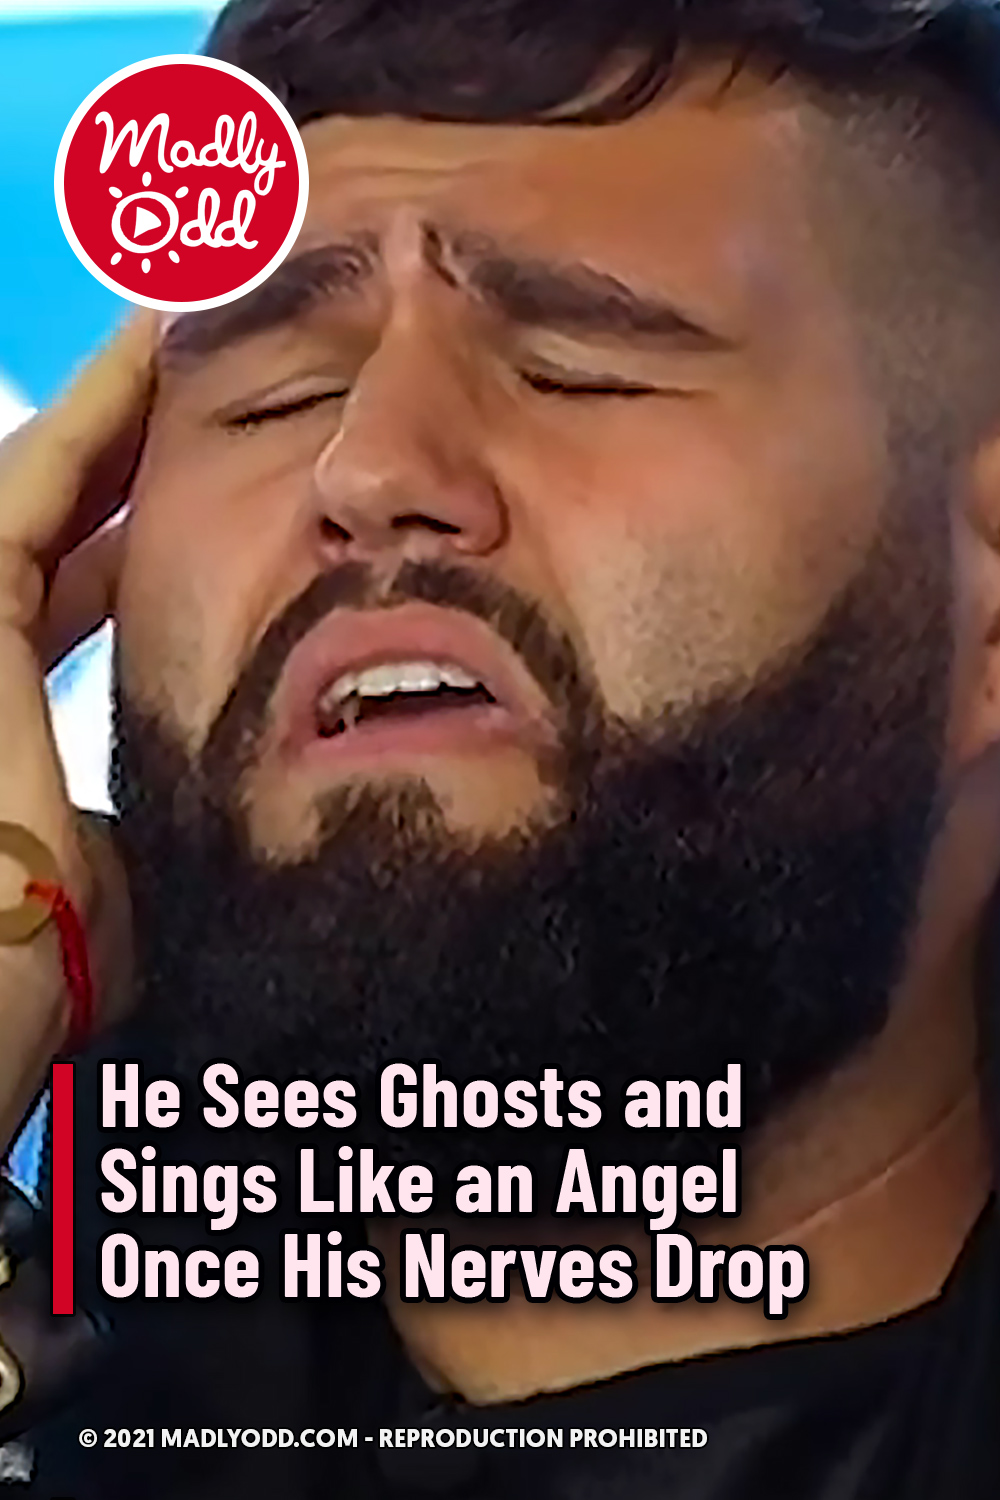 He Sees Ghosts and Sings Like an Angel Once His Nerves Drop